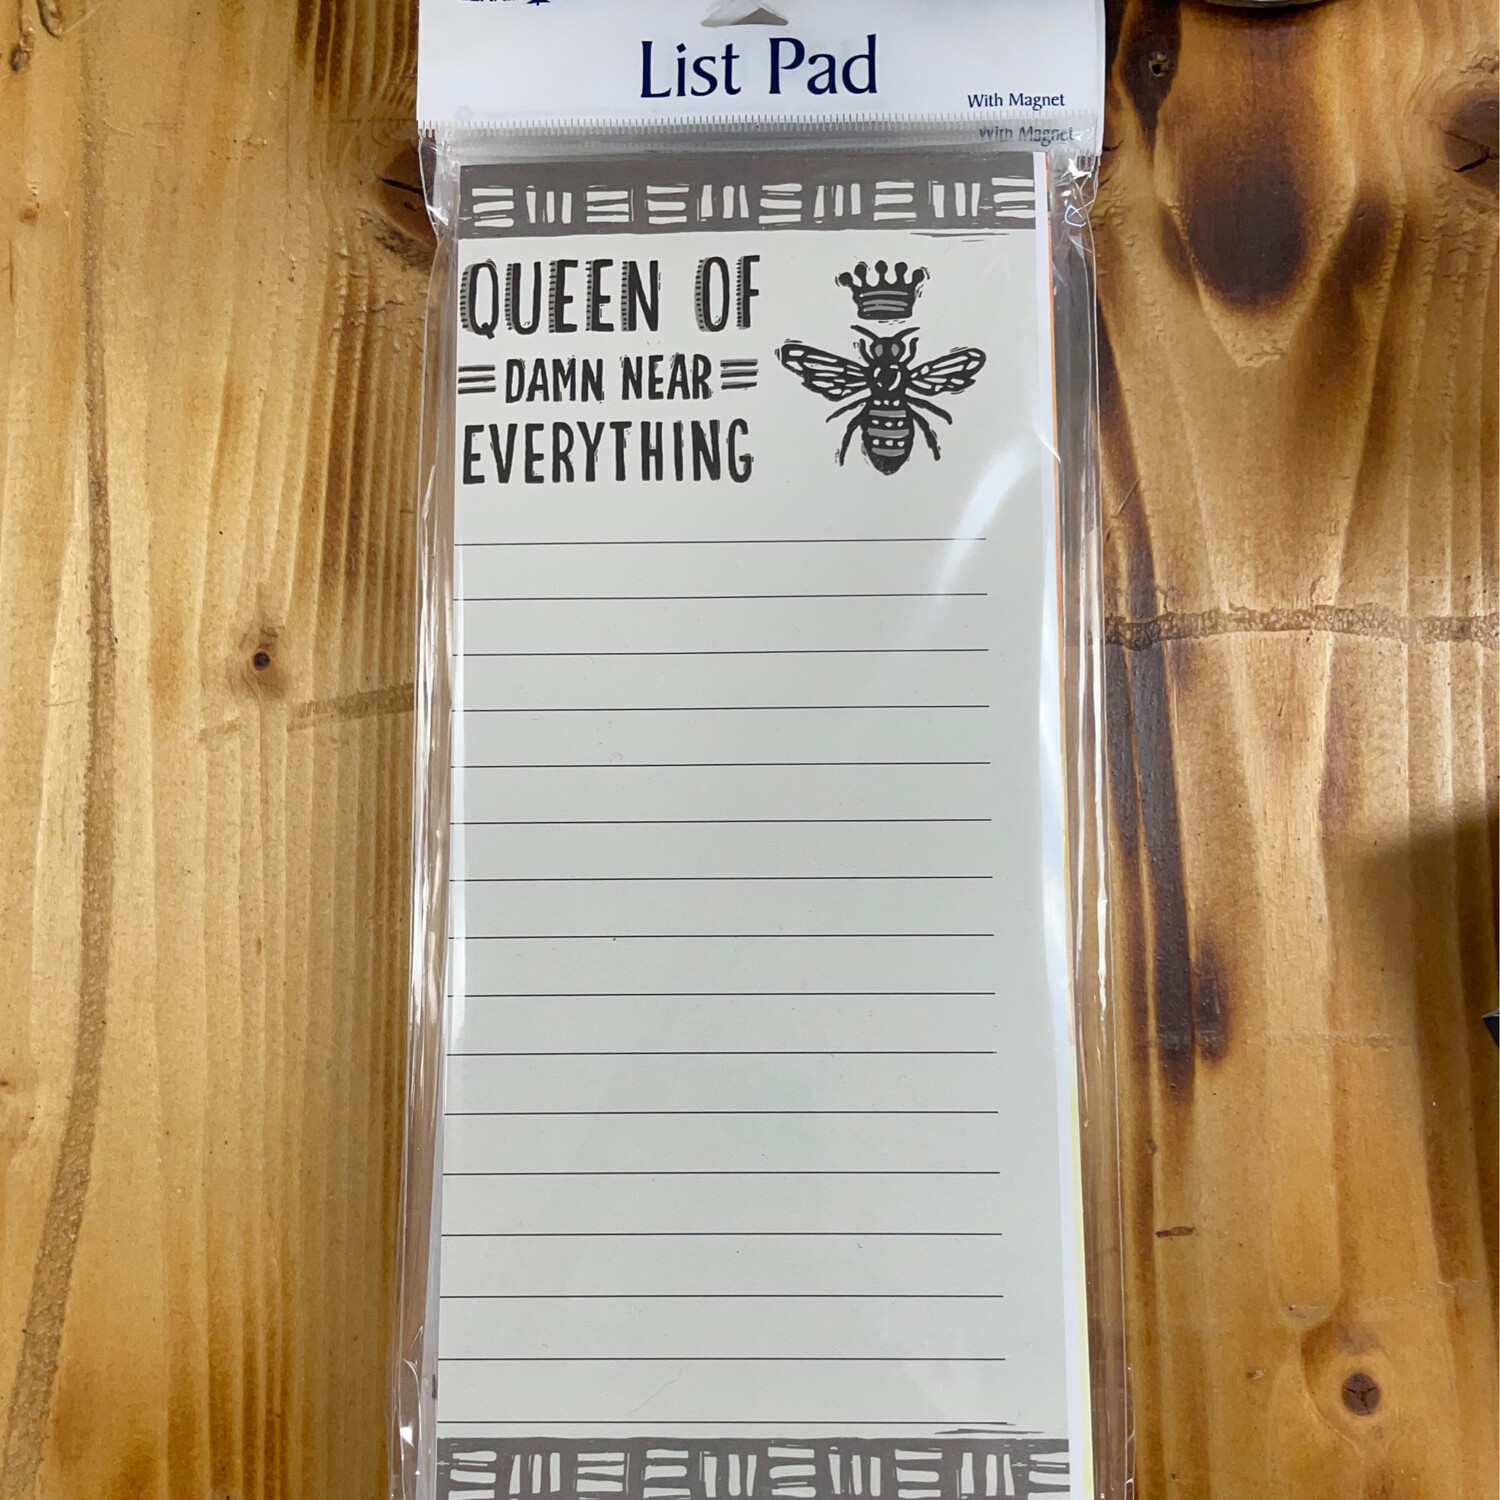 List Pad Queen Everything